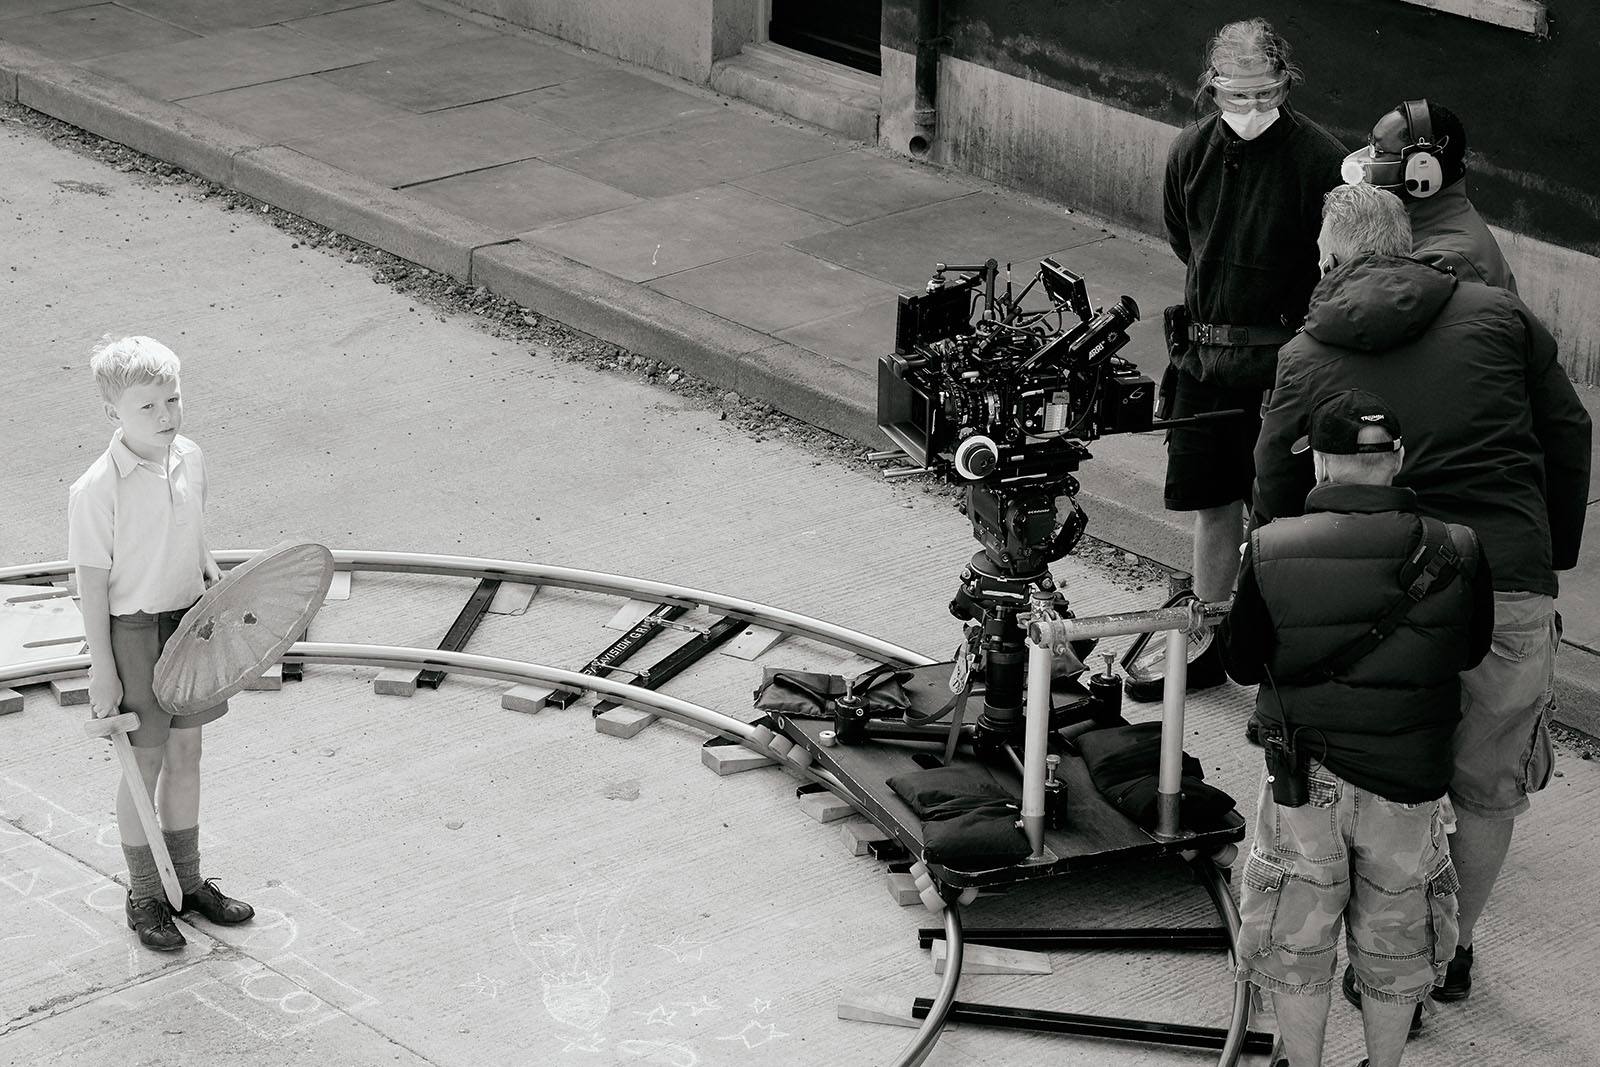 ARRI Alex Mini LF on an orbit dolly track during the production of Belfast. Image © Warner Bros